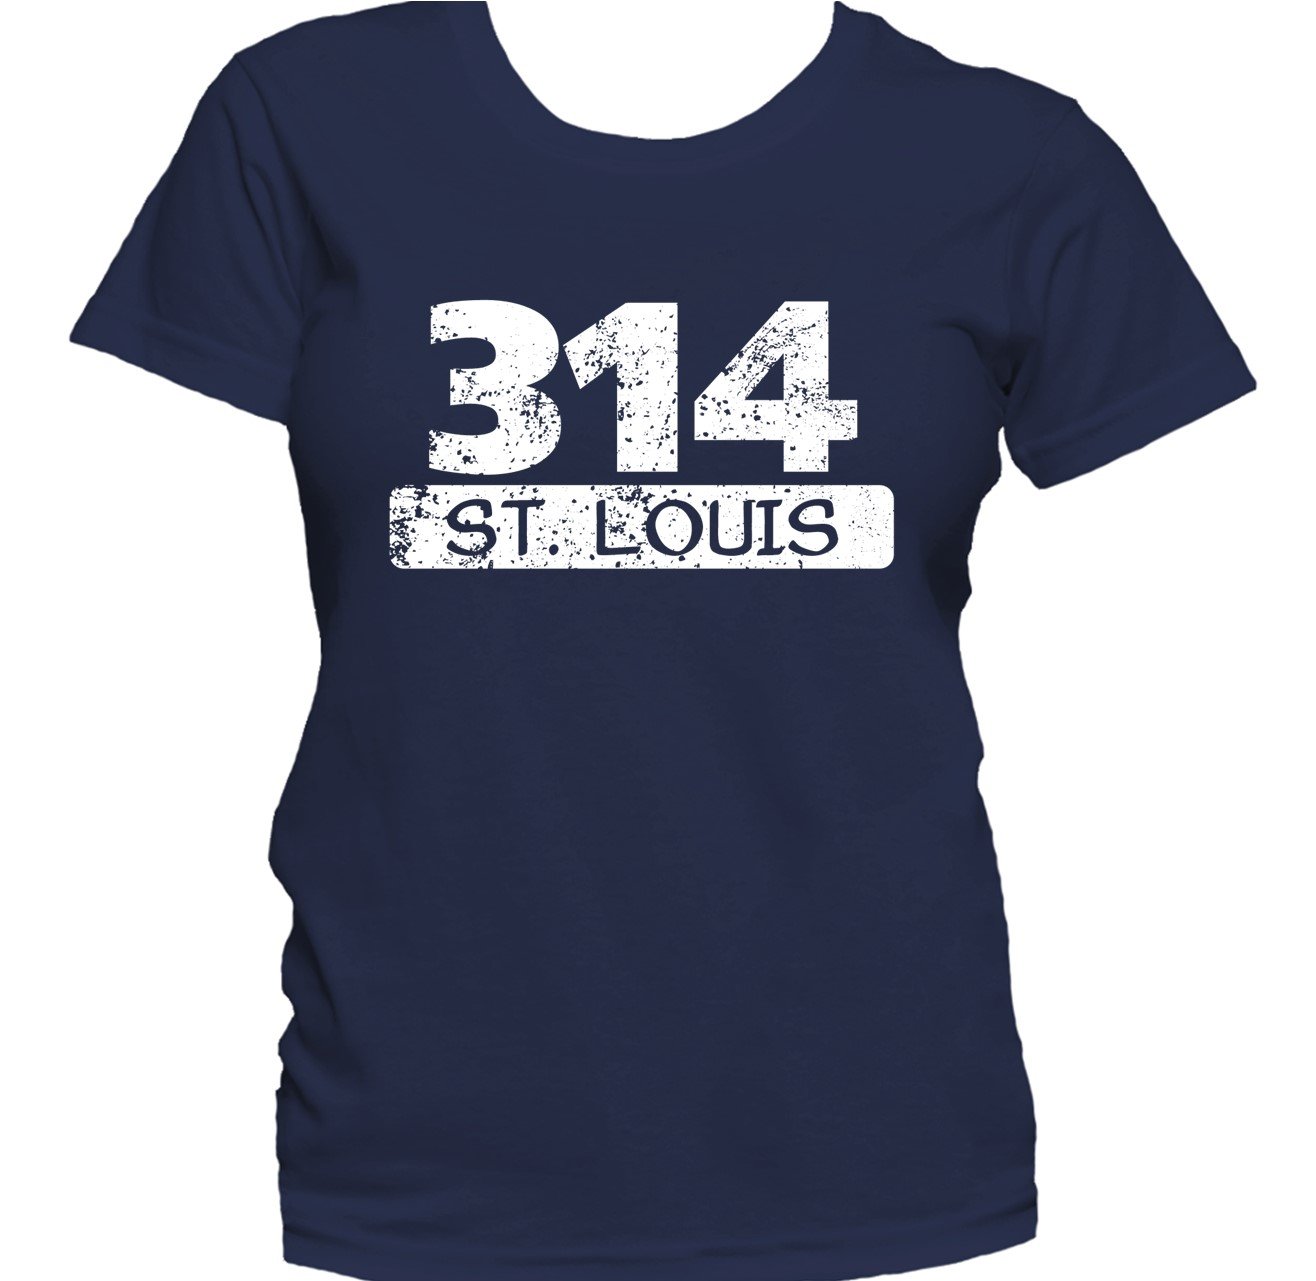 Really Awesome Shirts Retro Style 314 St. Louis Missouri Area Code Distressed Women's T-Shirt Women's Large / Navy